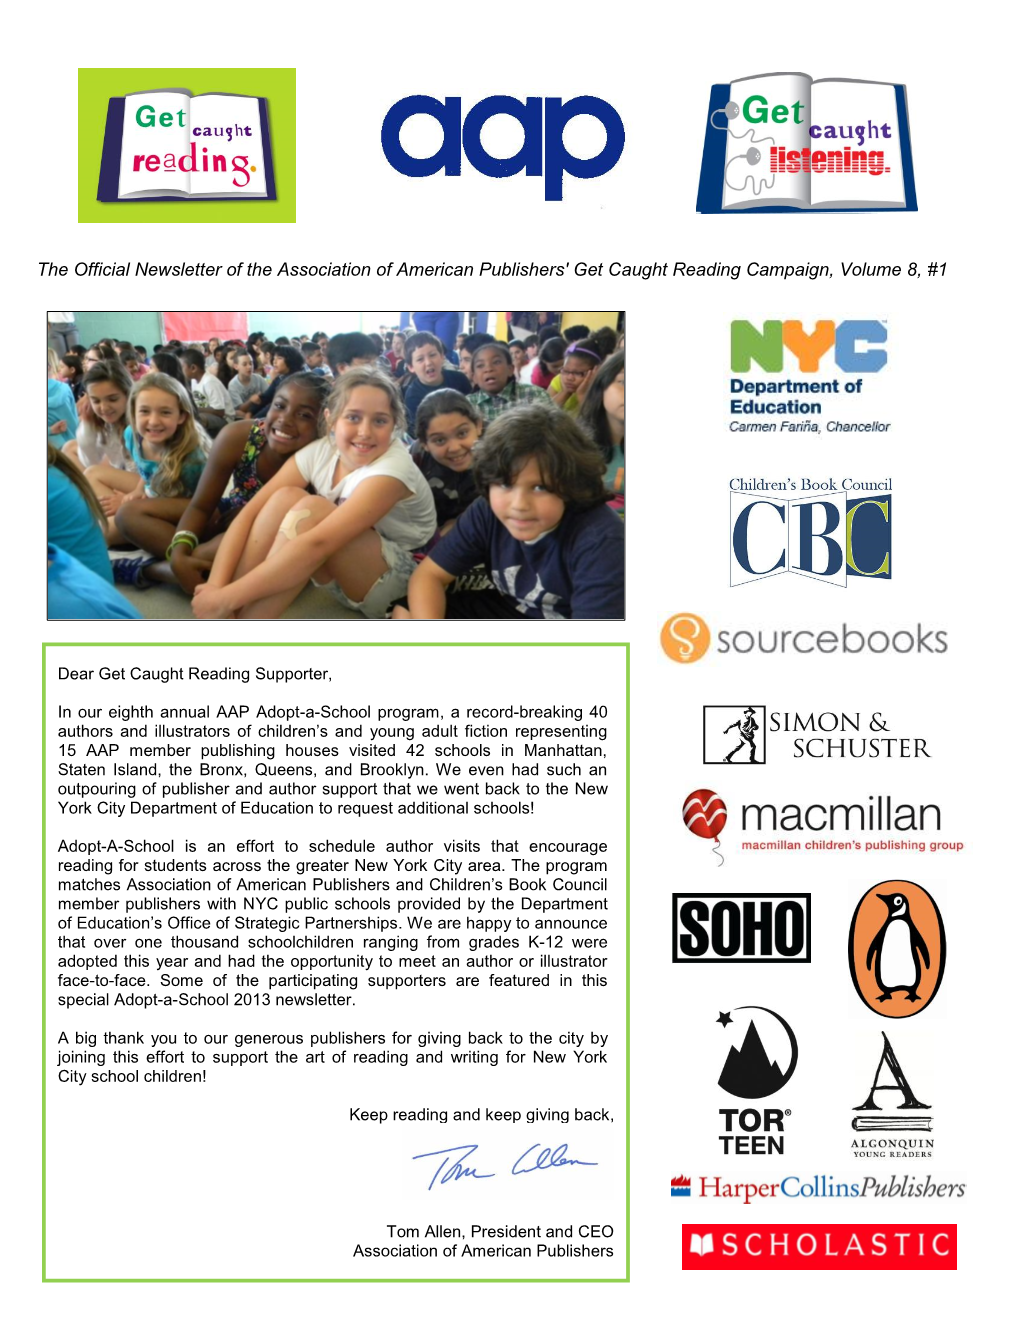 The Official Newsletter of the Association of American Publishers' Get Caught Reading Campaign, Volume 8, #1